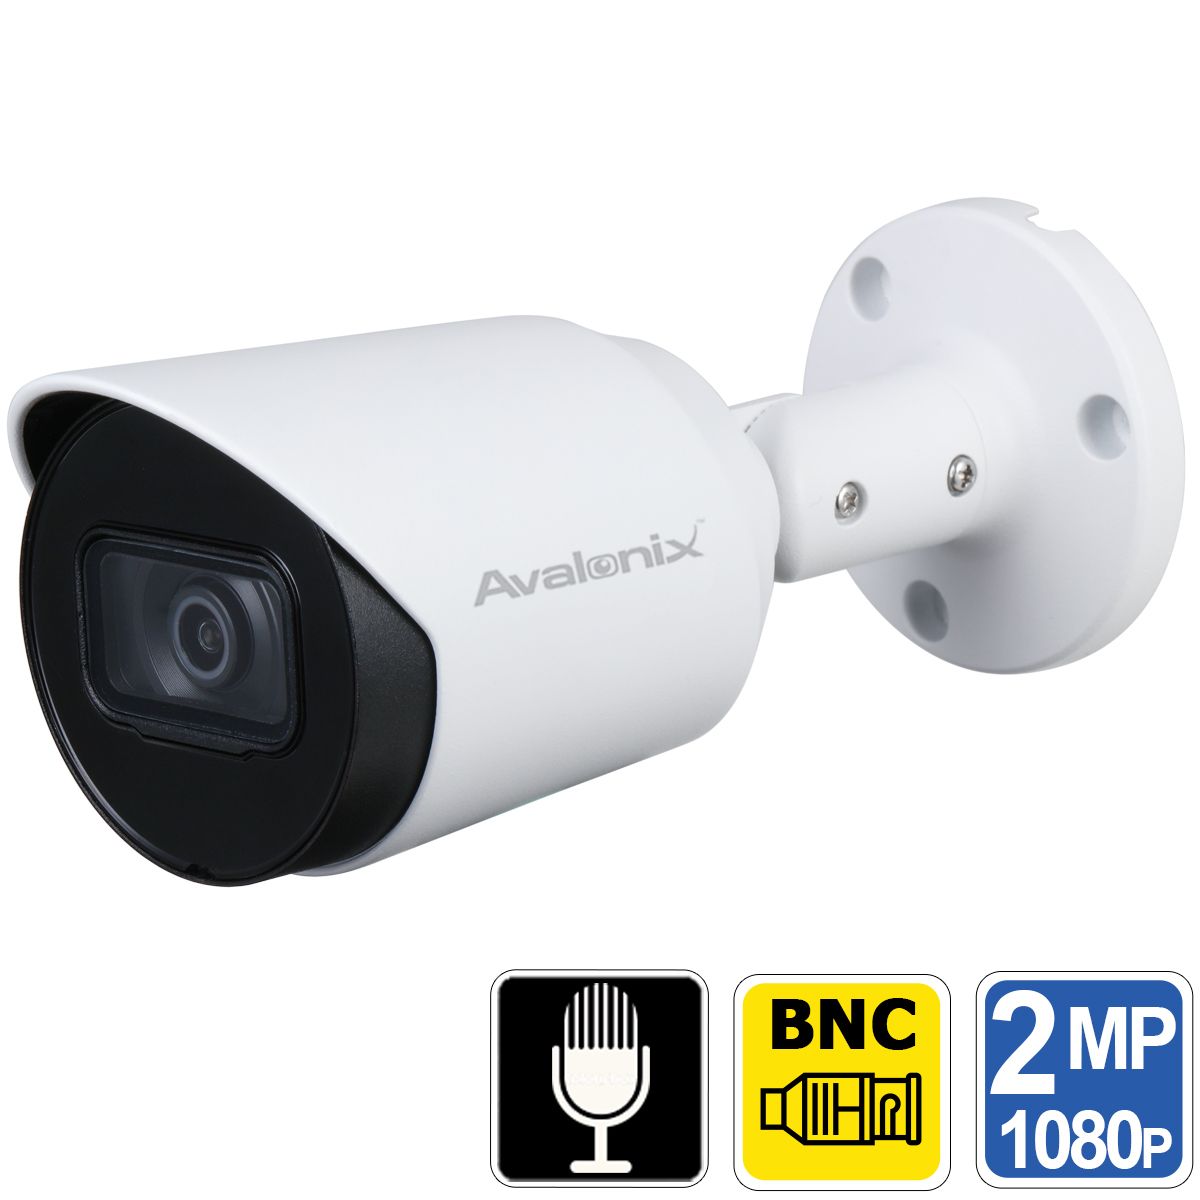 Small Surveillance Camera, 150 Degree Viewing Angle Built In WiFi